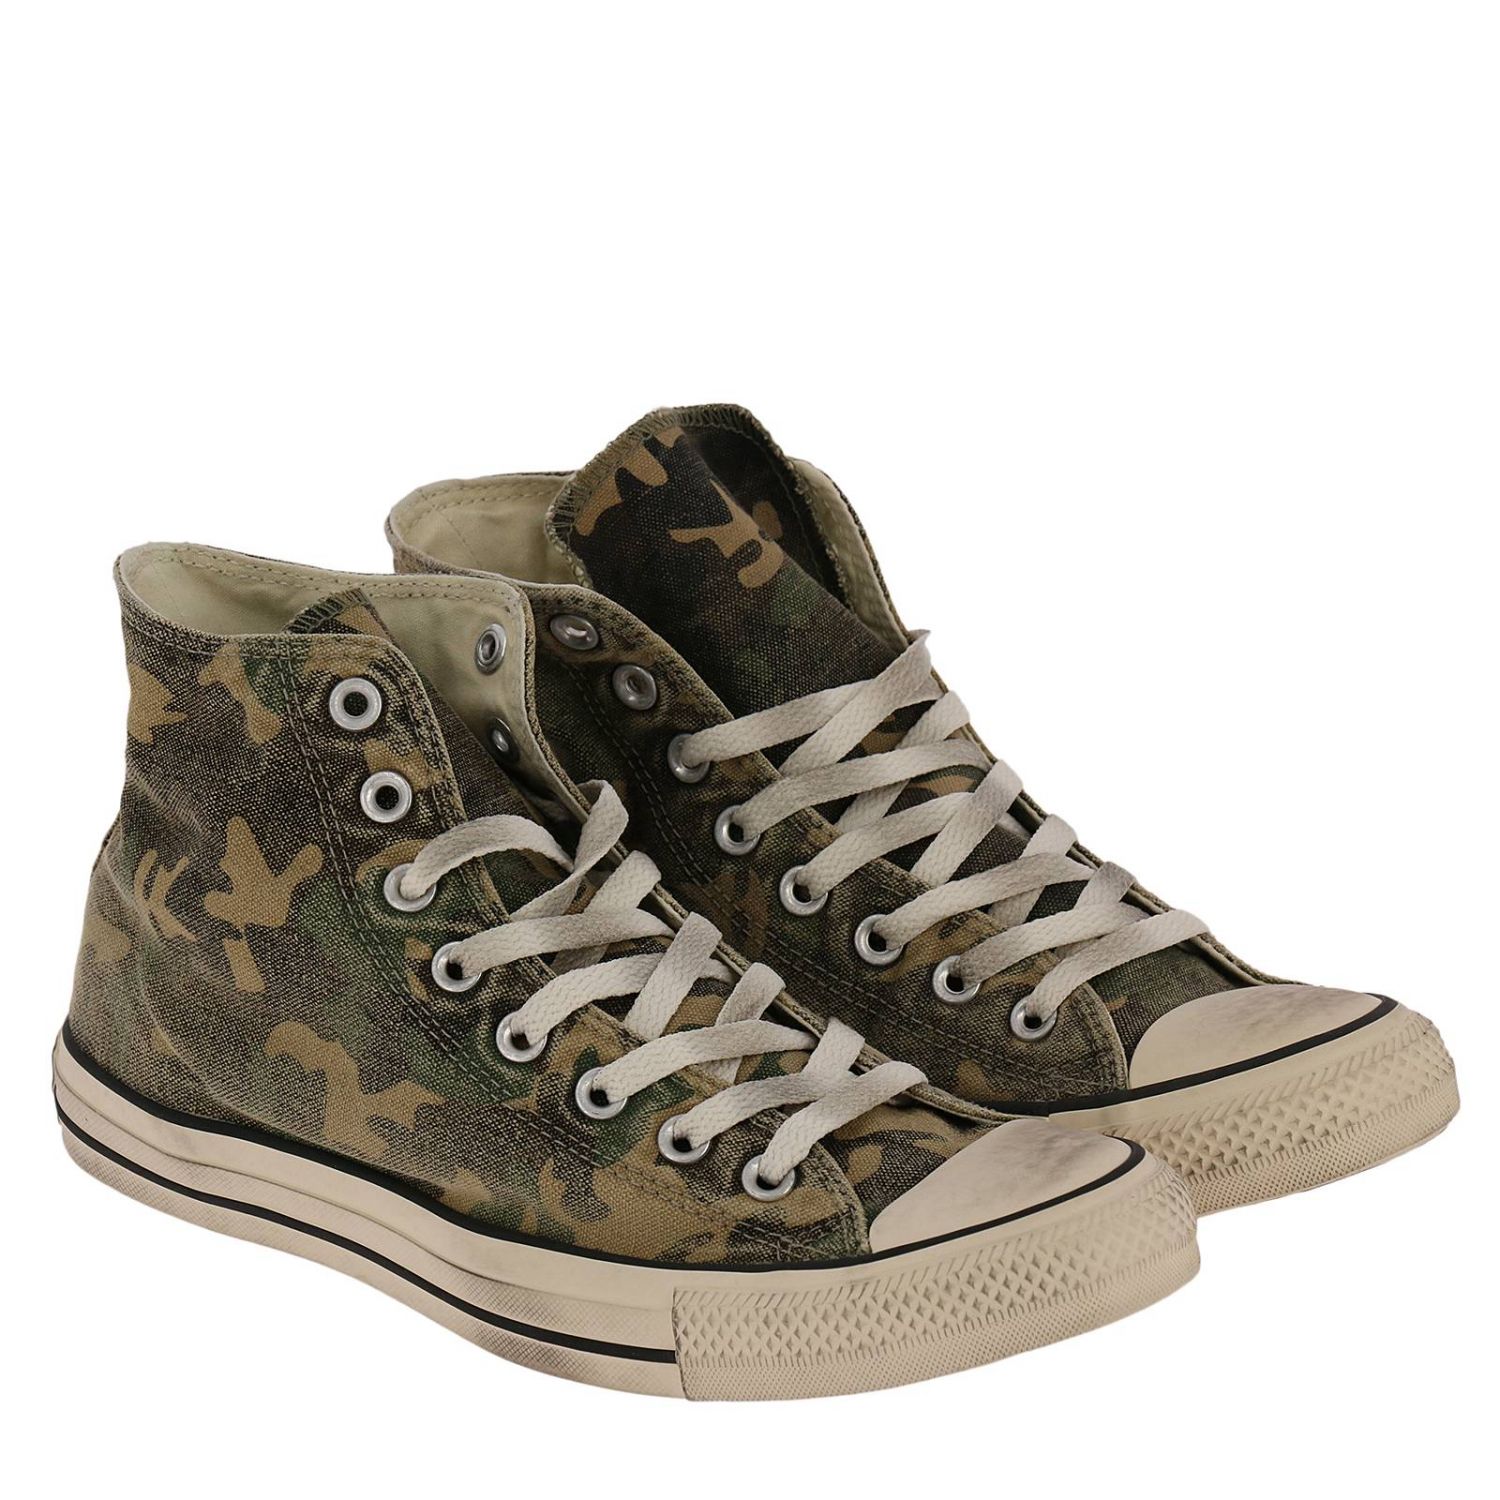 Converse Limited Edition Outlet: Sneakers men - Green | Sneakers ...